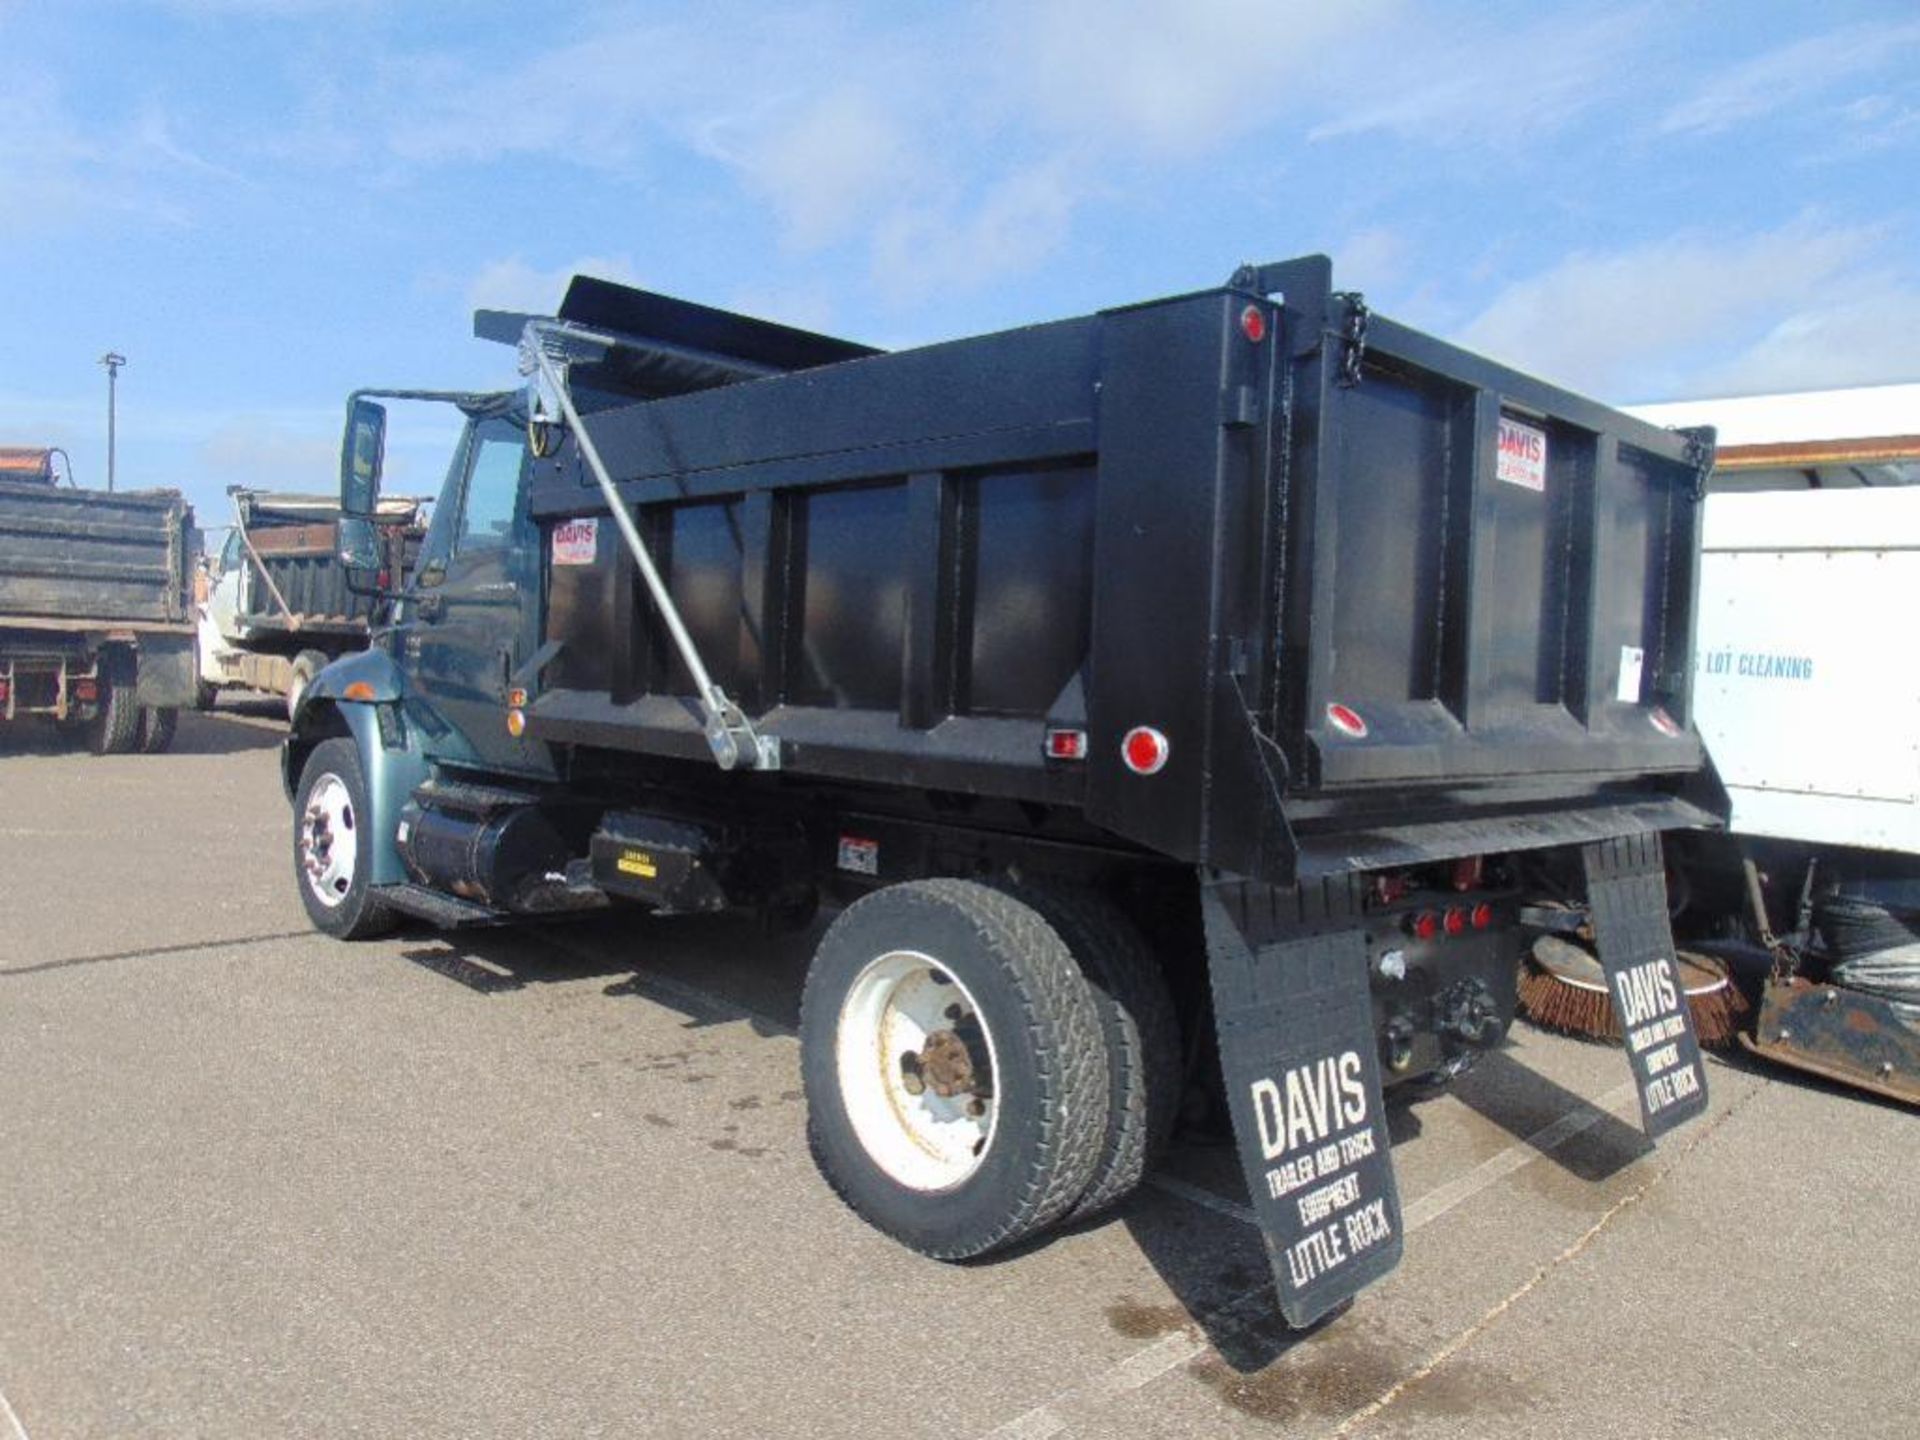 2006 IHC 4300 s/a Dump Truck s/n 1htmmaam07h453143, dt466 eng, auto trans, od reads 76237 miles, new - Image 8 of 10